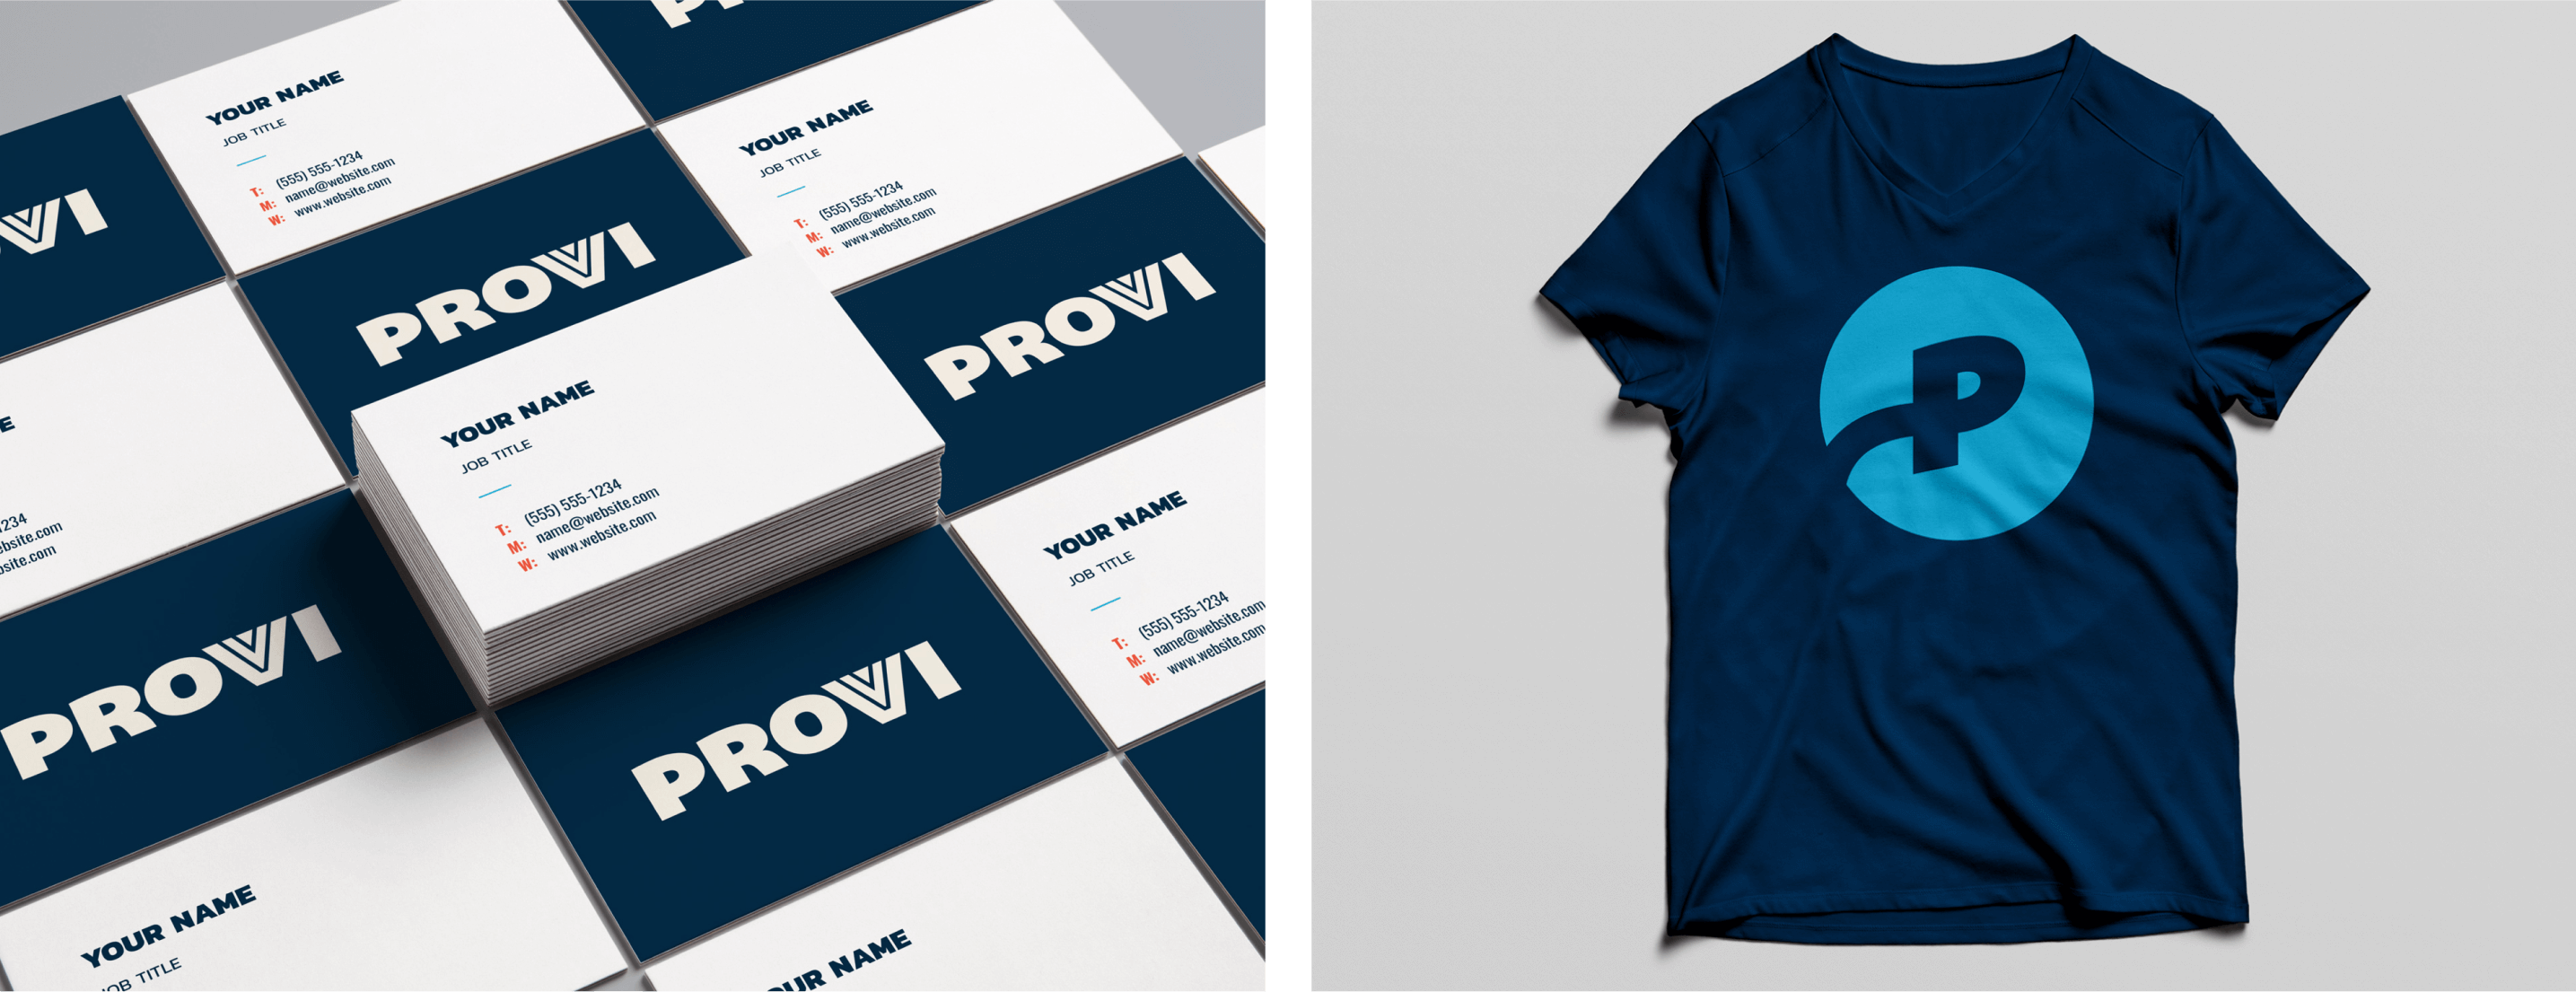 Business cards and a t-shirt with the new Provi branding